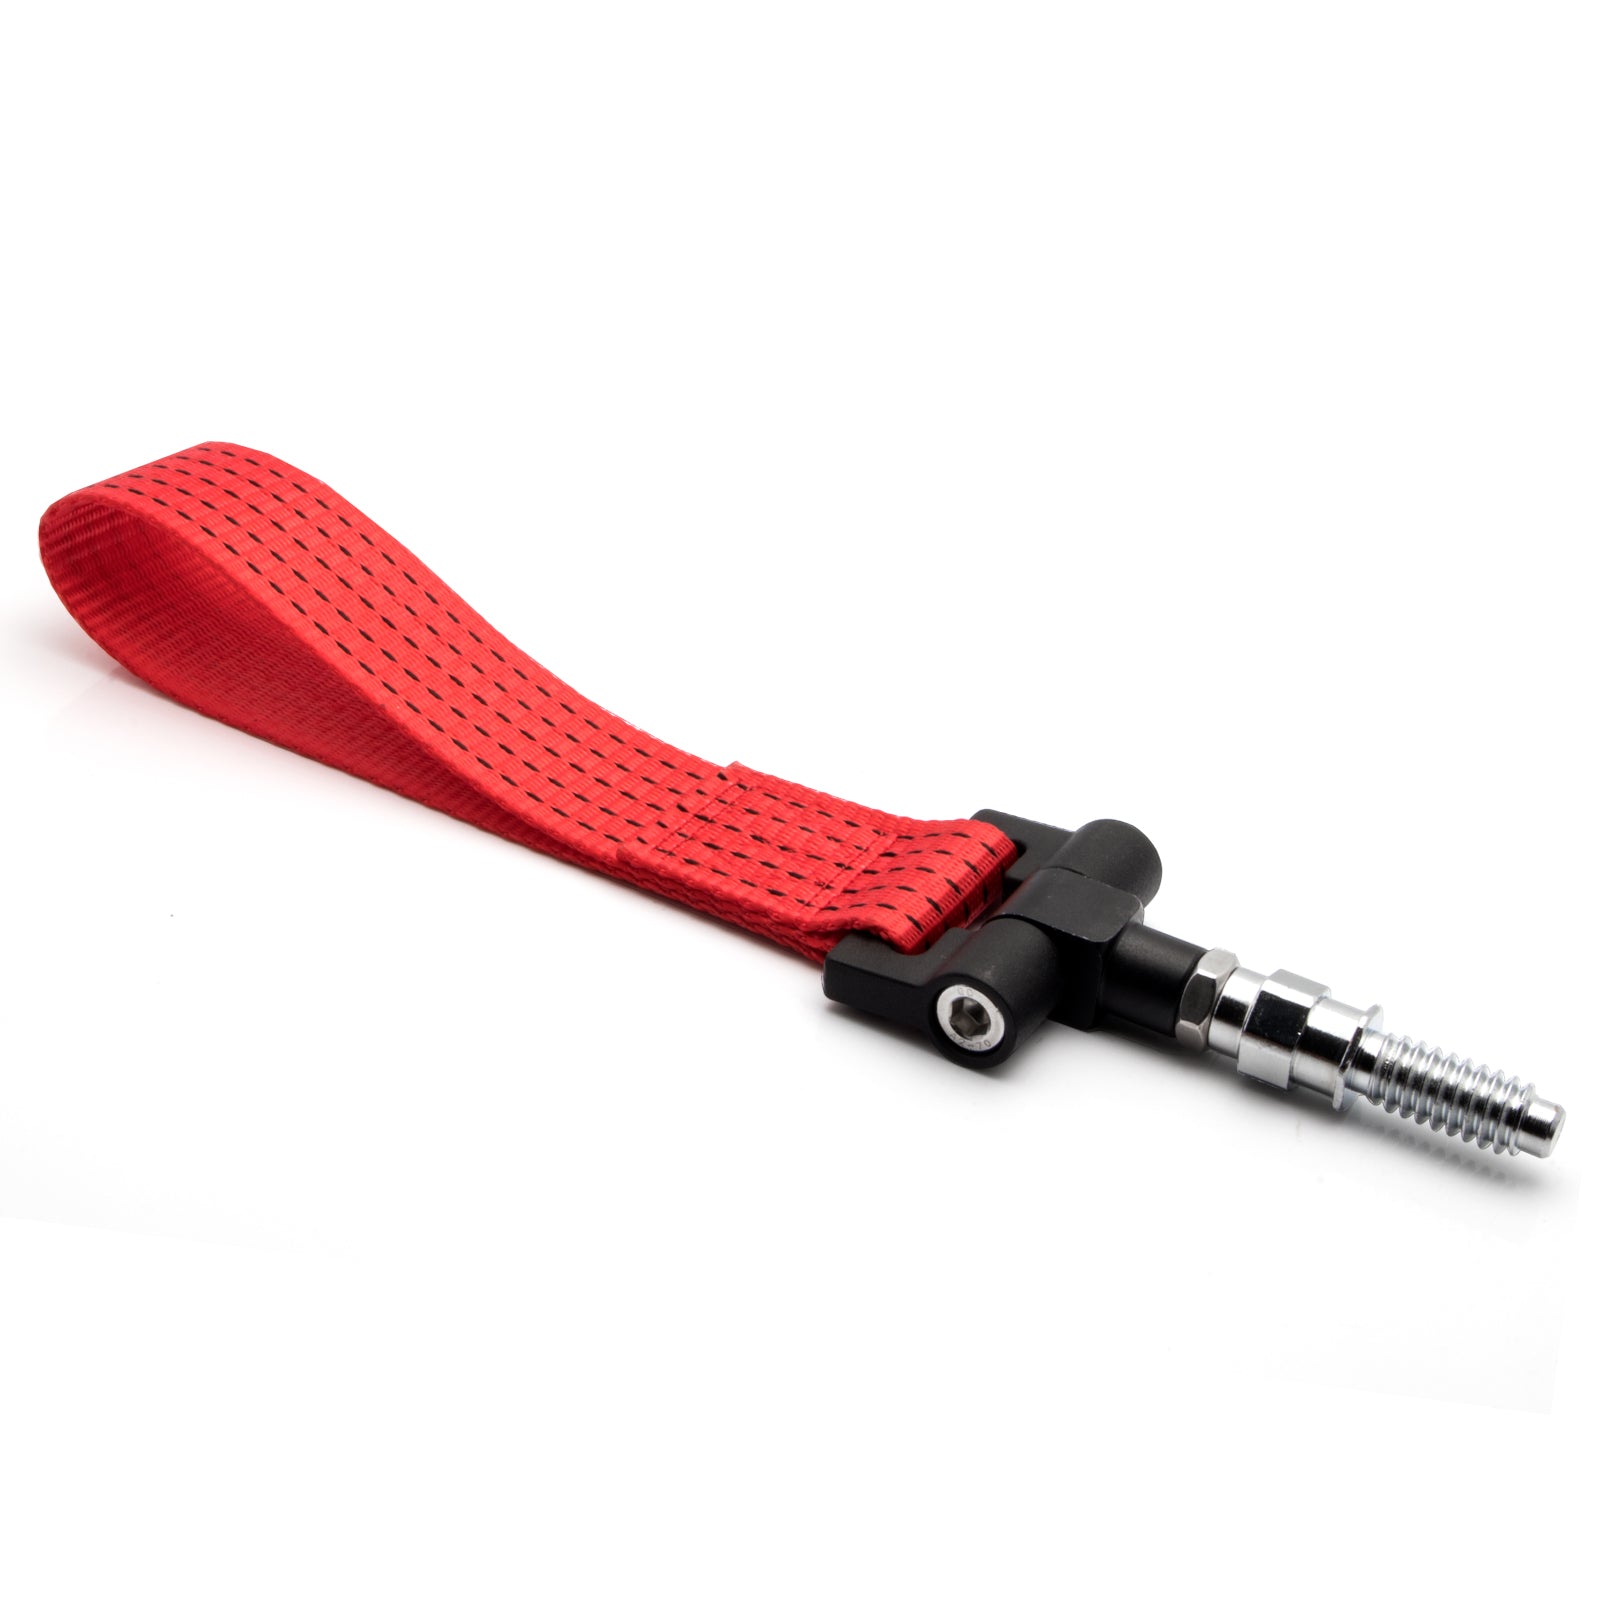 Blue / Black / Red JDM Style Tow Hole Adapter with Towing Strap